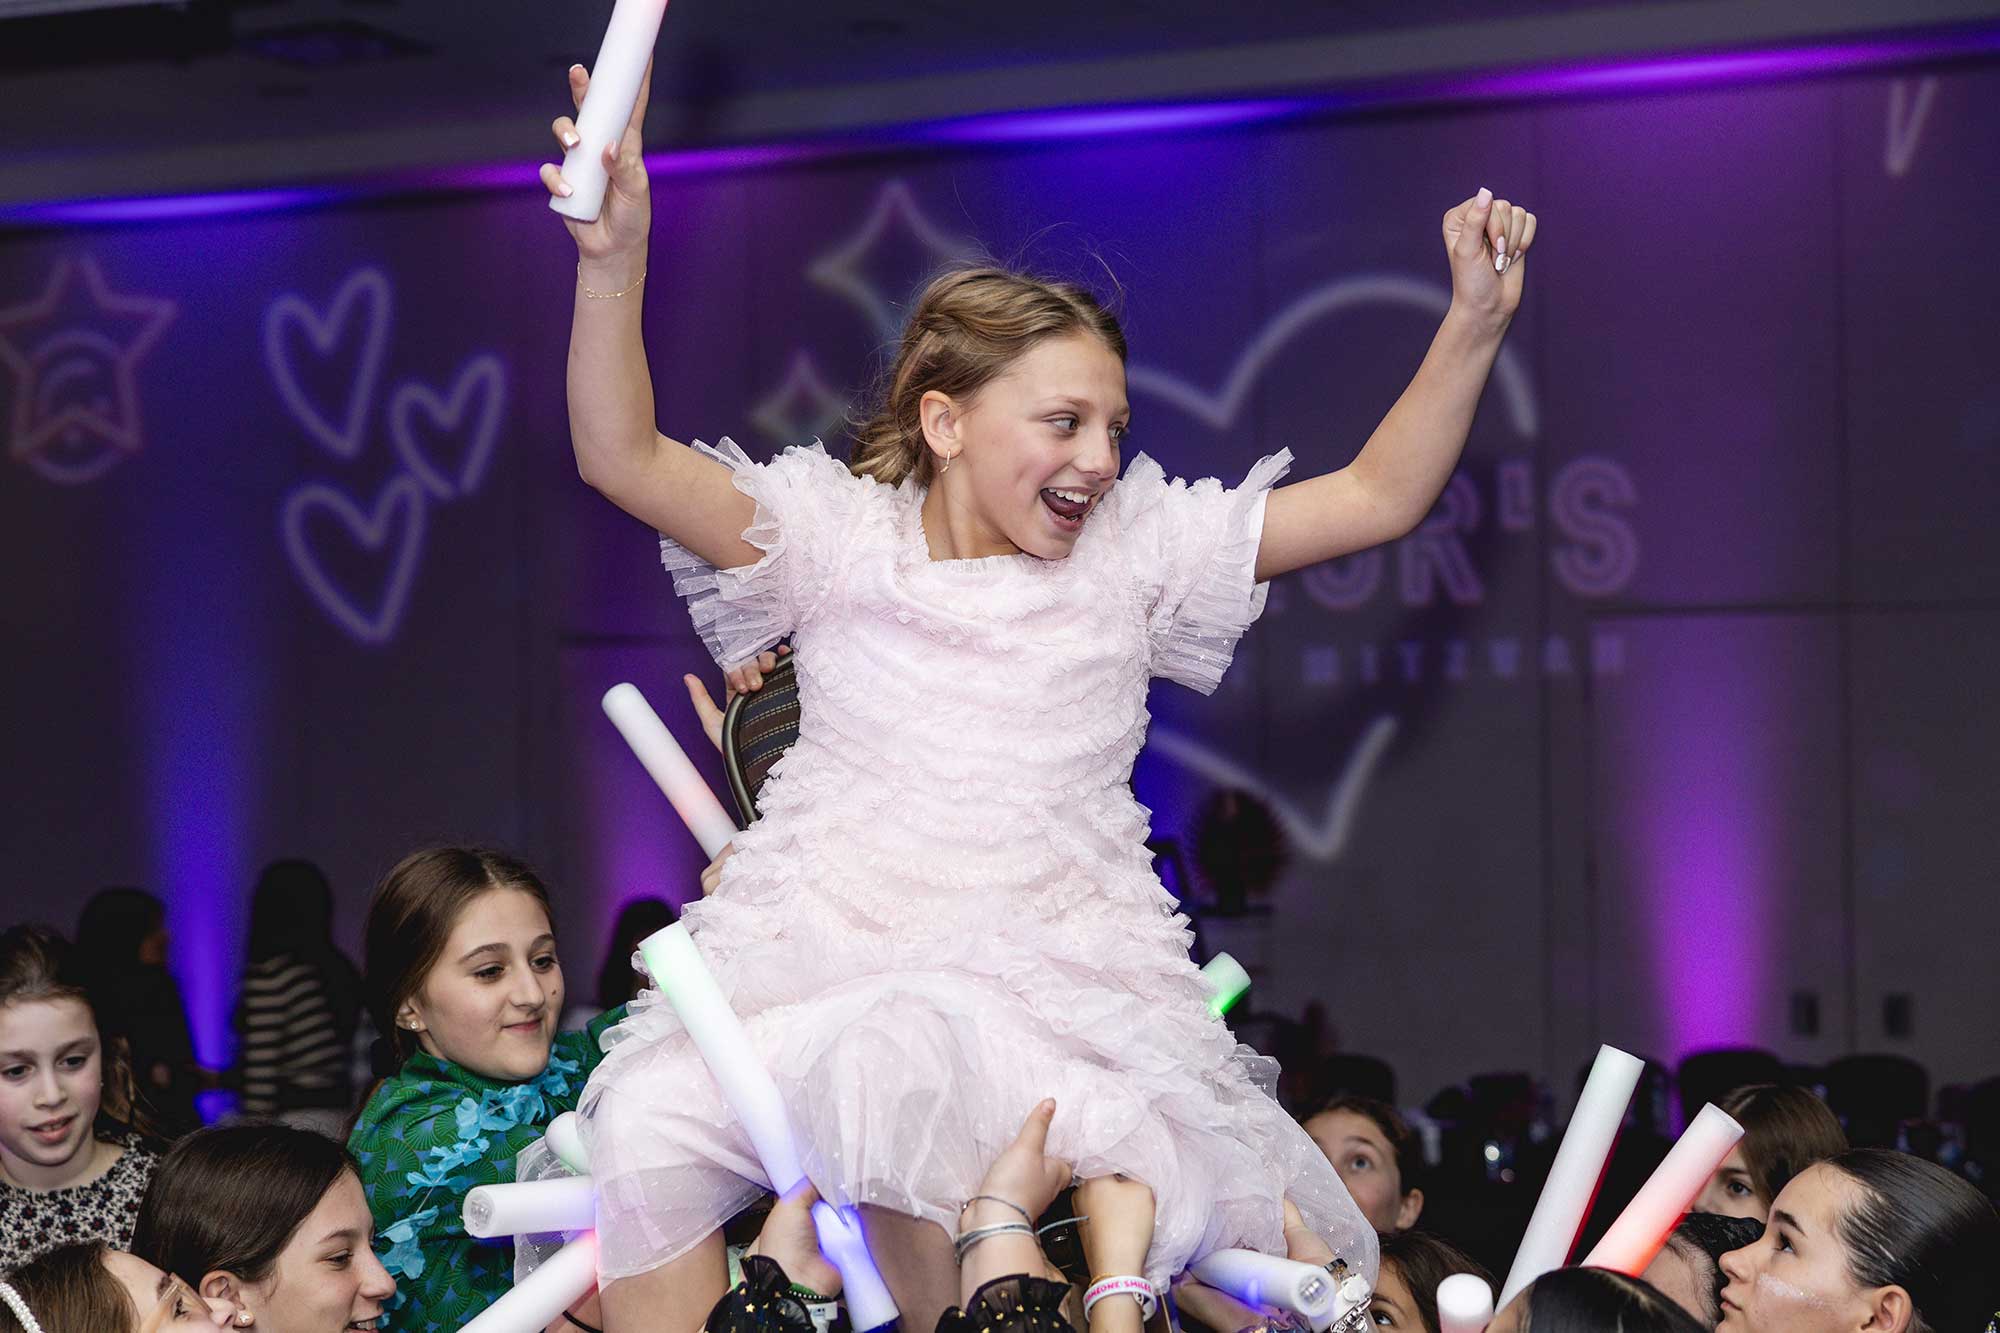 A joyful girl being lifted in the air on a chair amidst a celebratory event with other children surrounding her with glowing sticks.